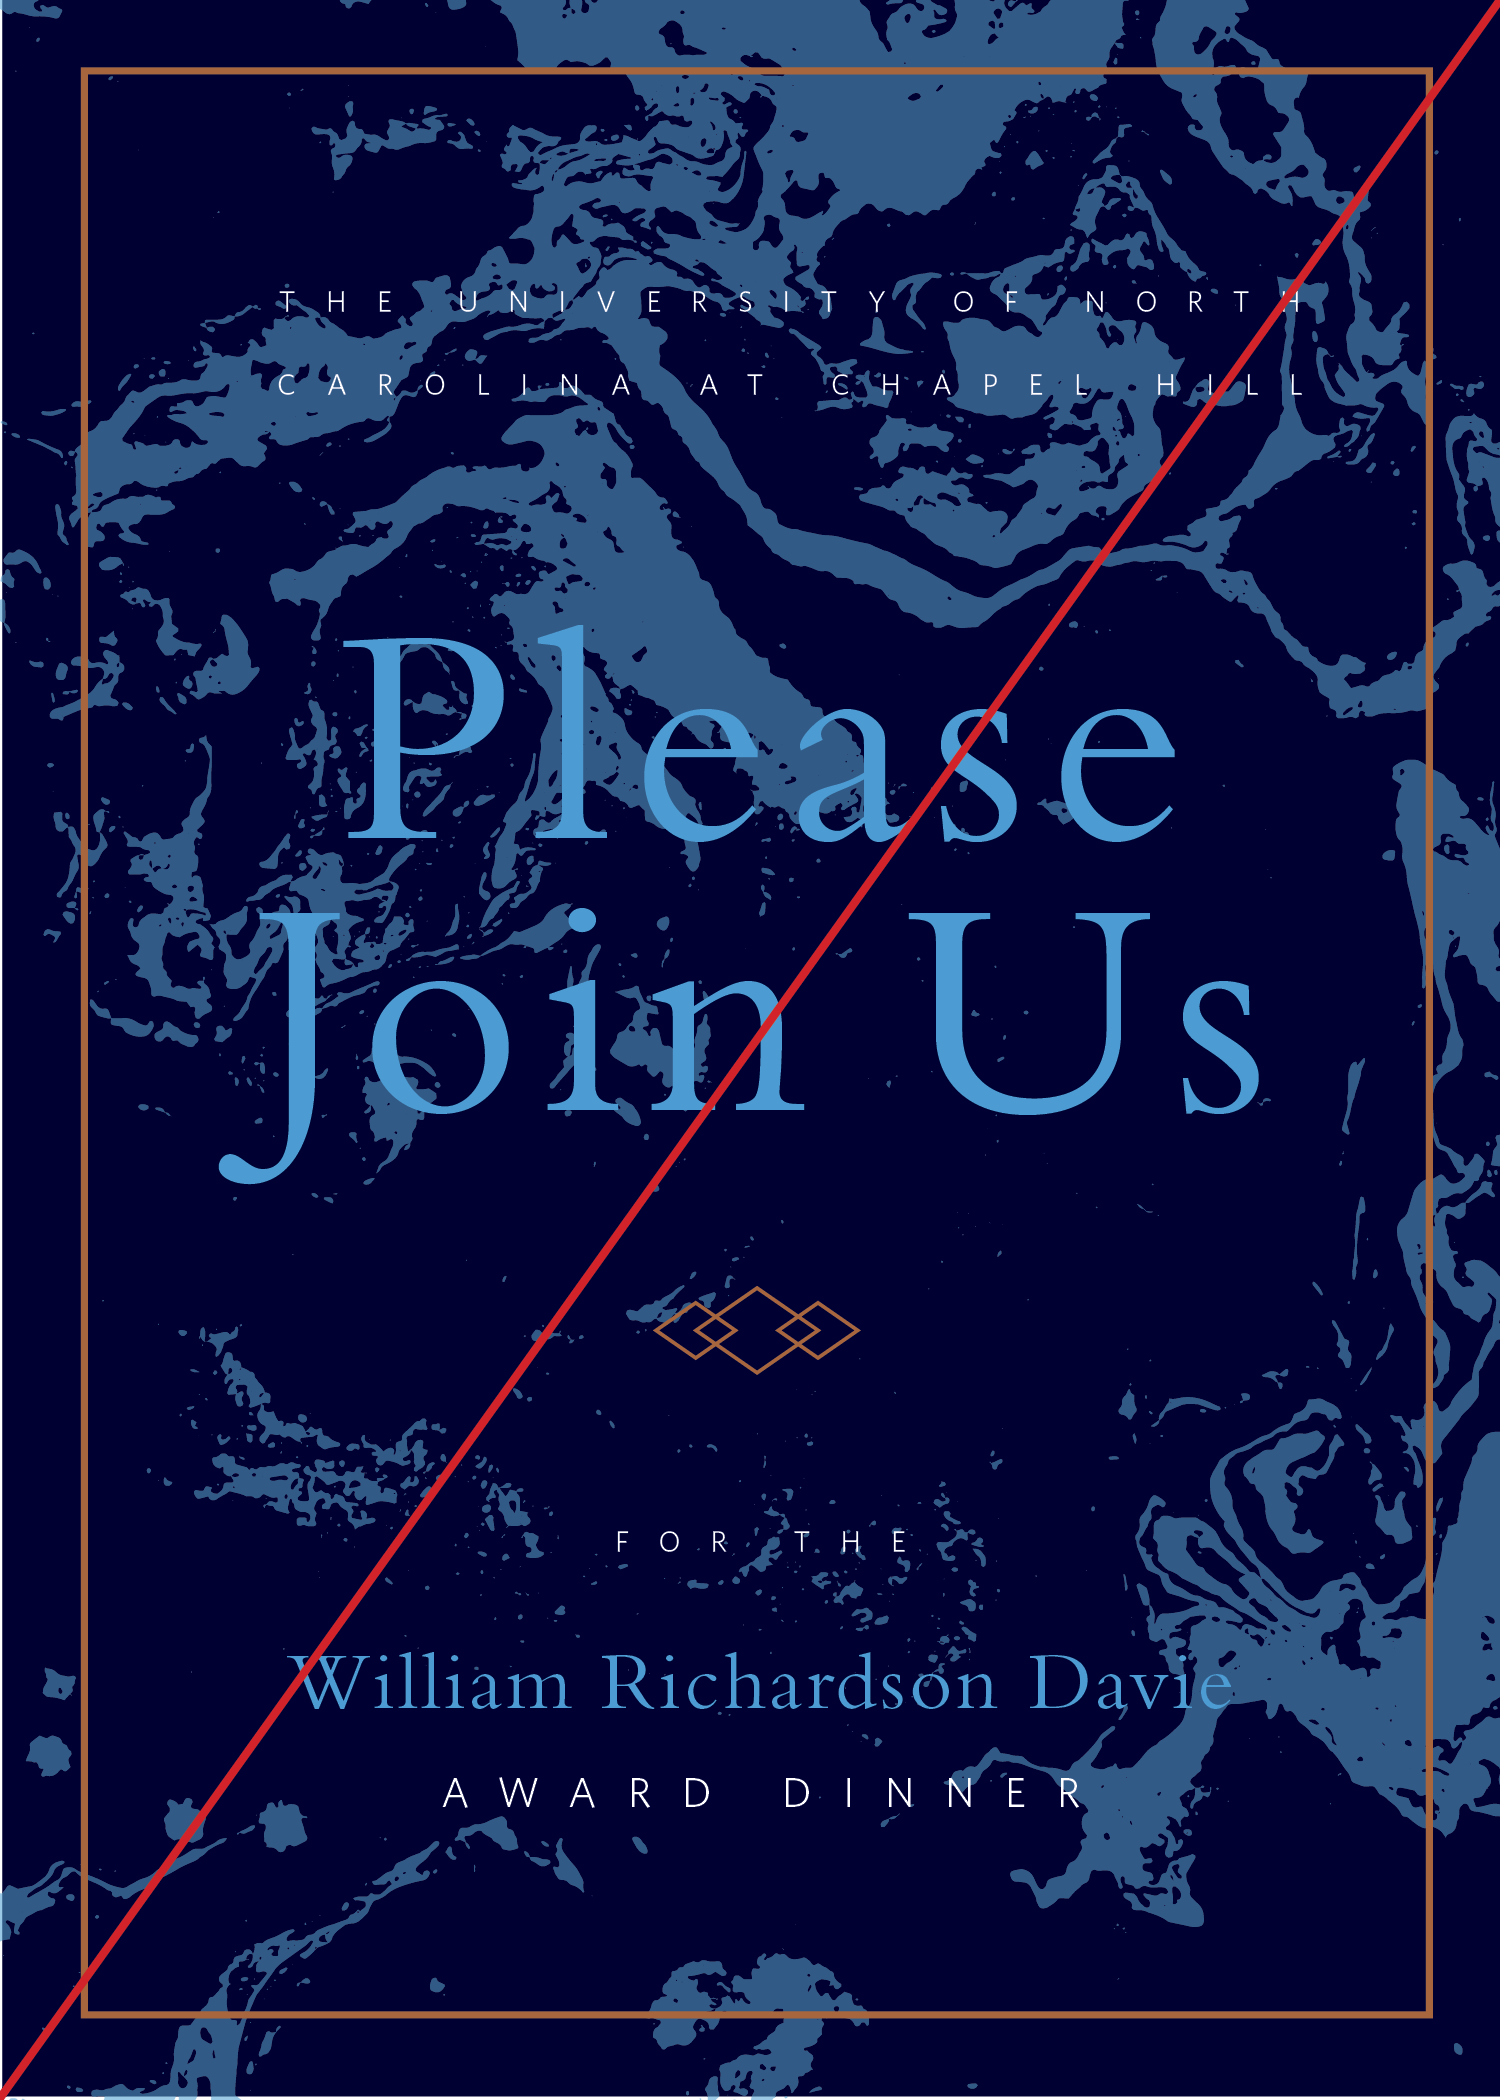 Invitation design showing improper use of the water texture with a red line going through it..